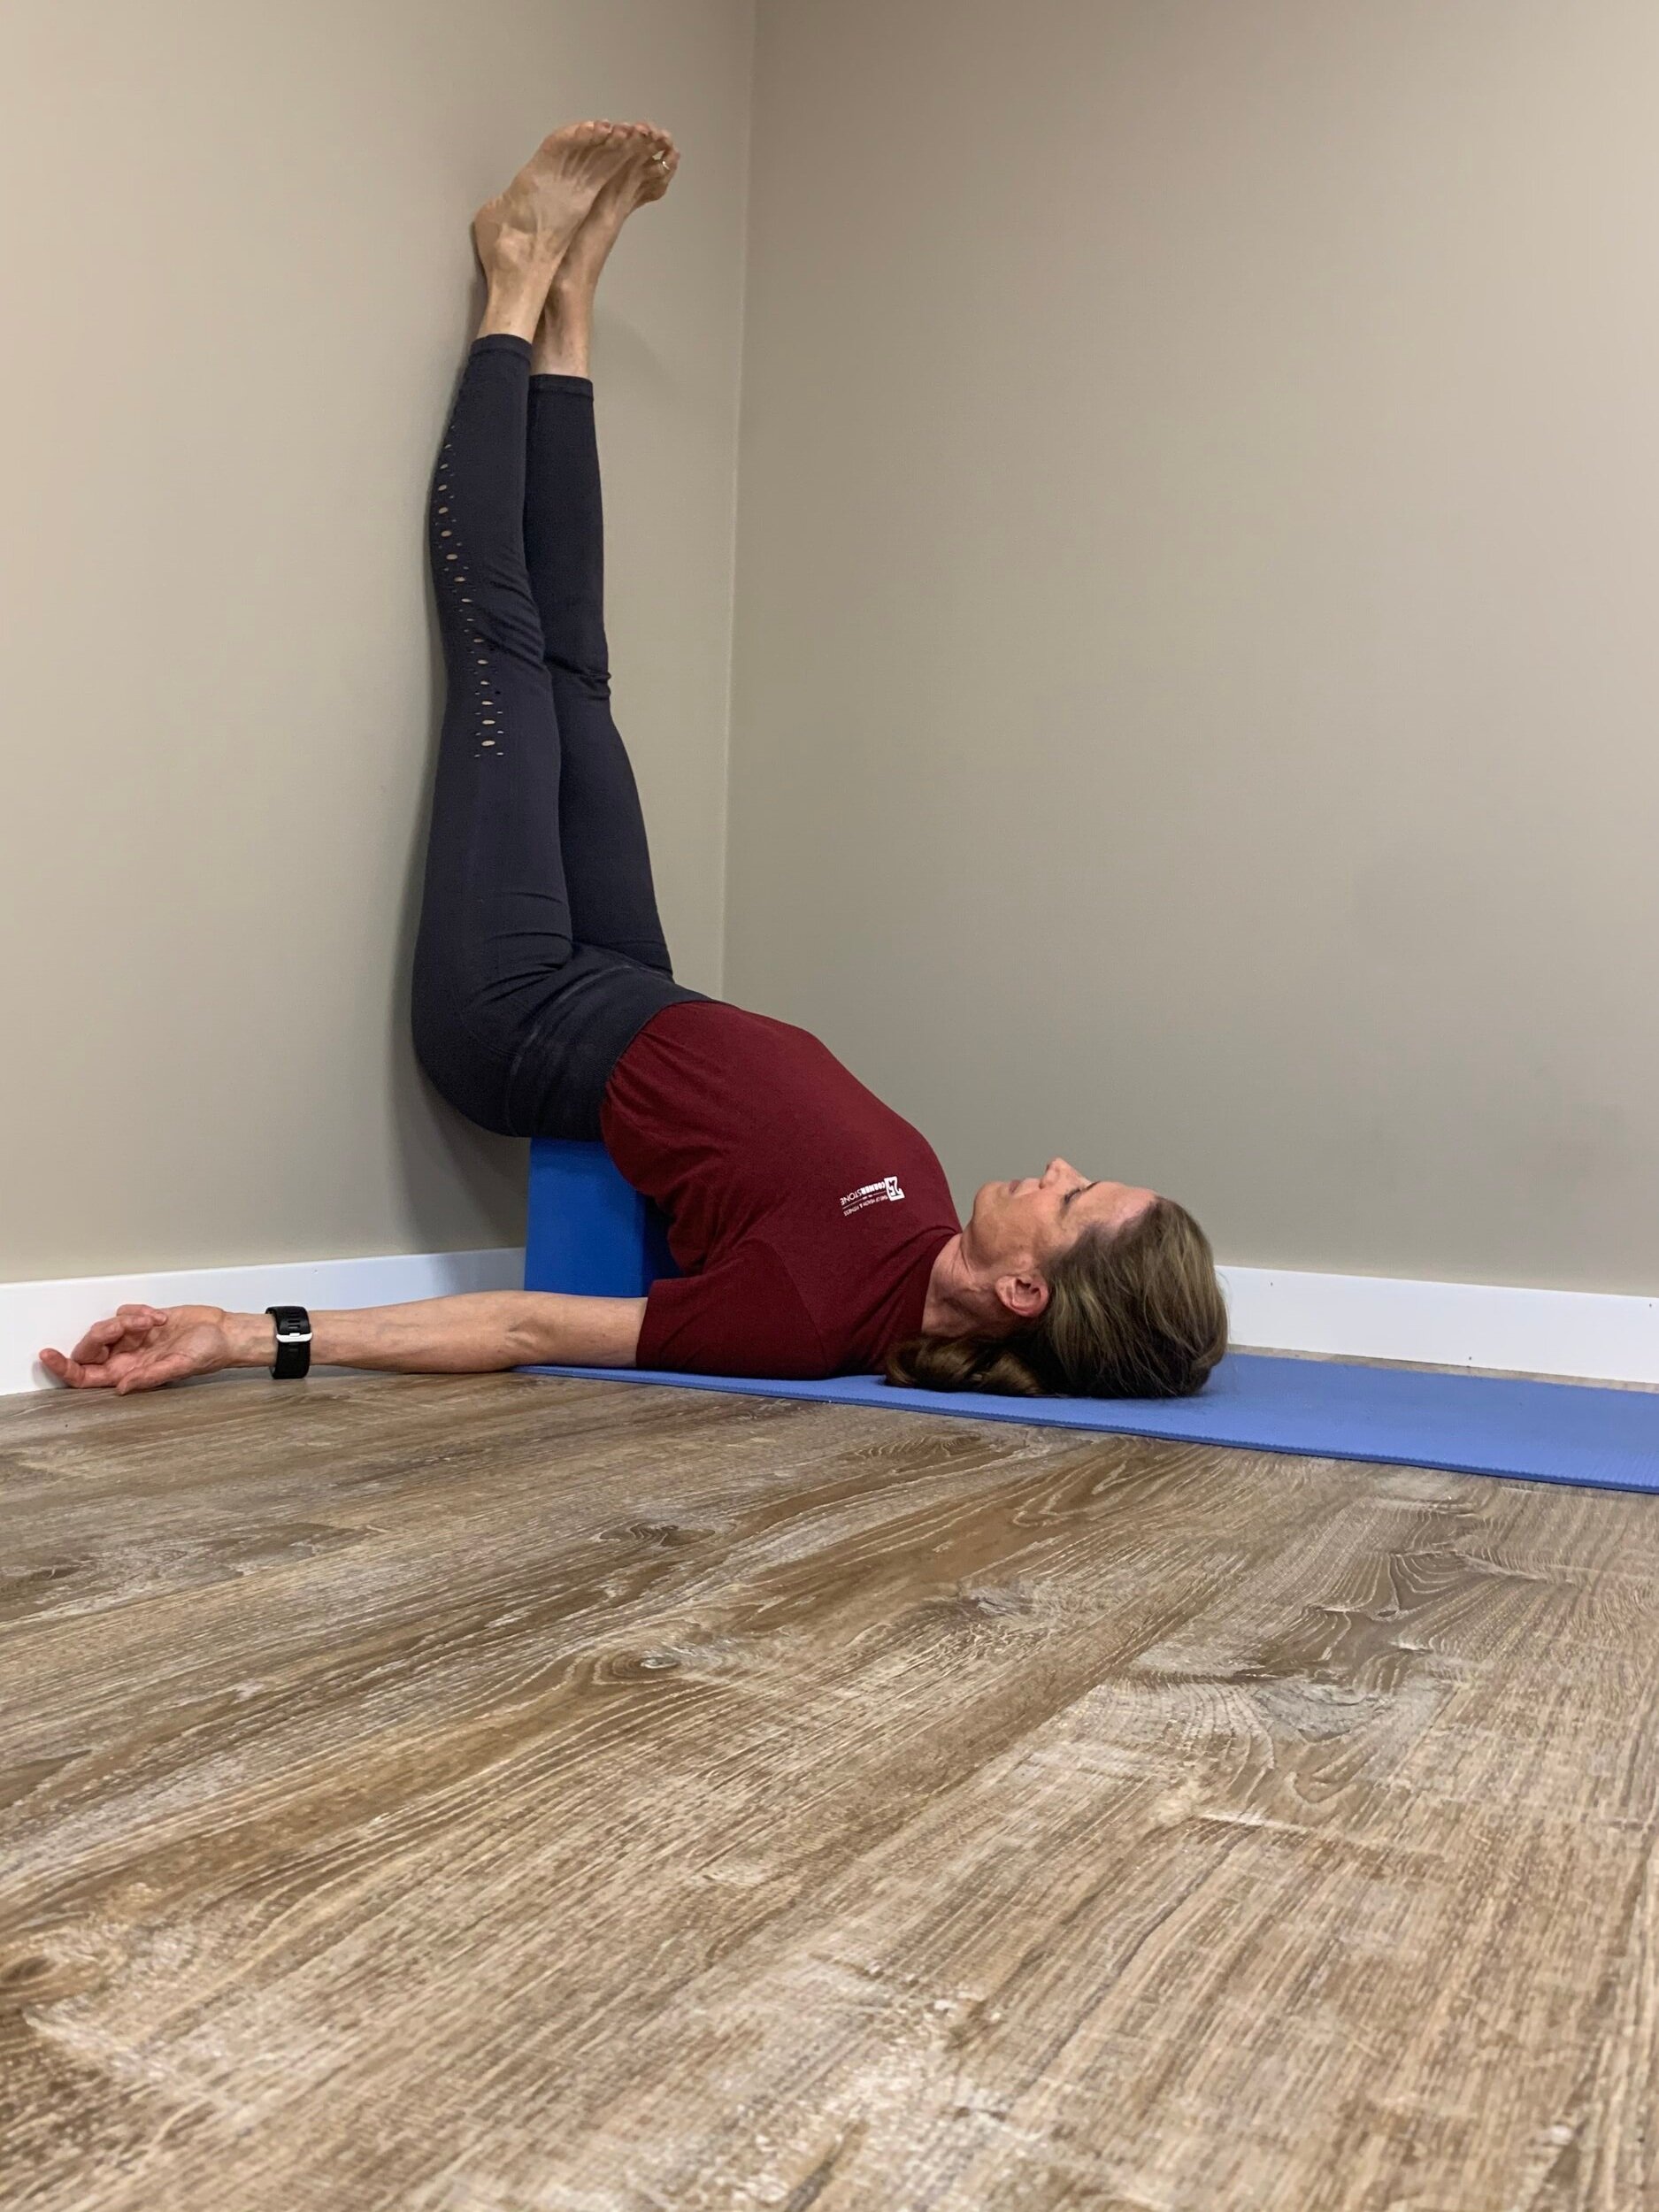 Common Questions About Shoulder Stand Exercise During Pregnancy - HiMommy